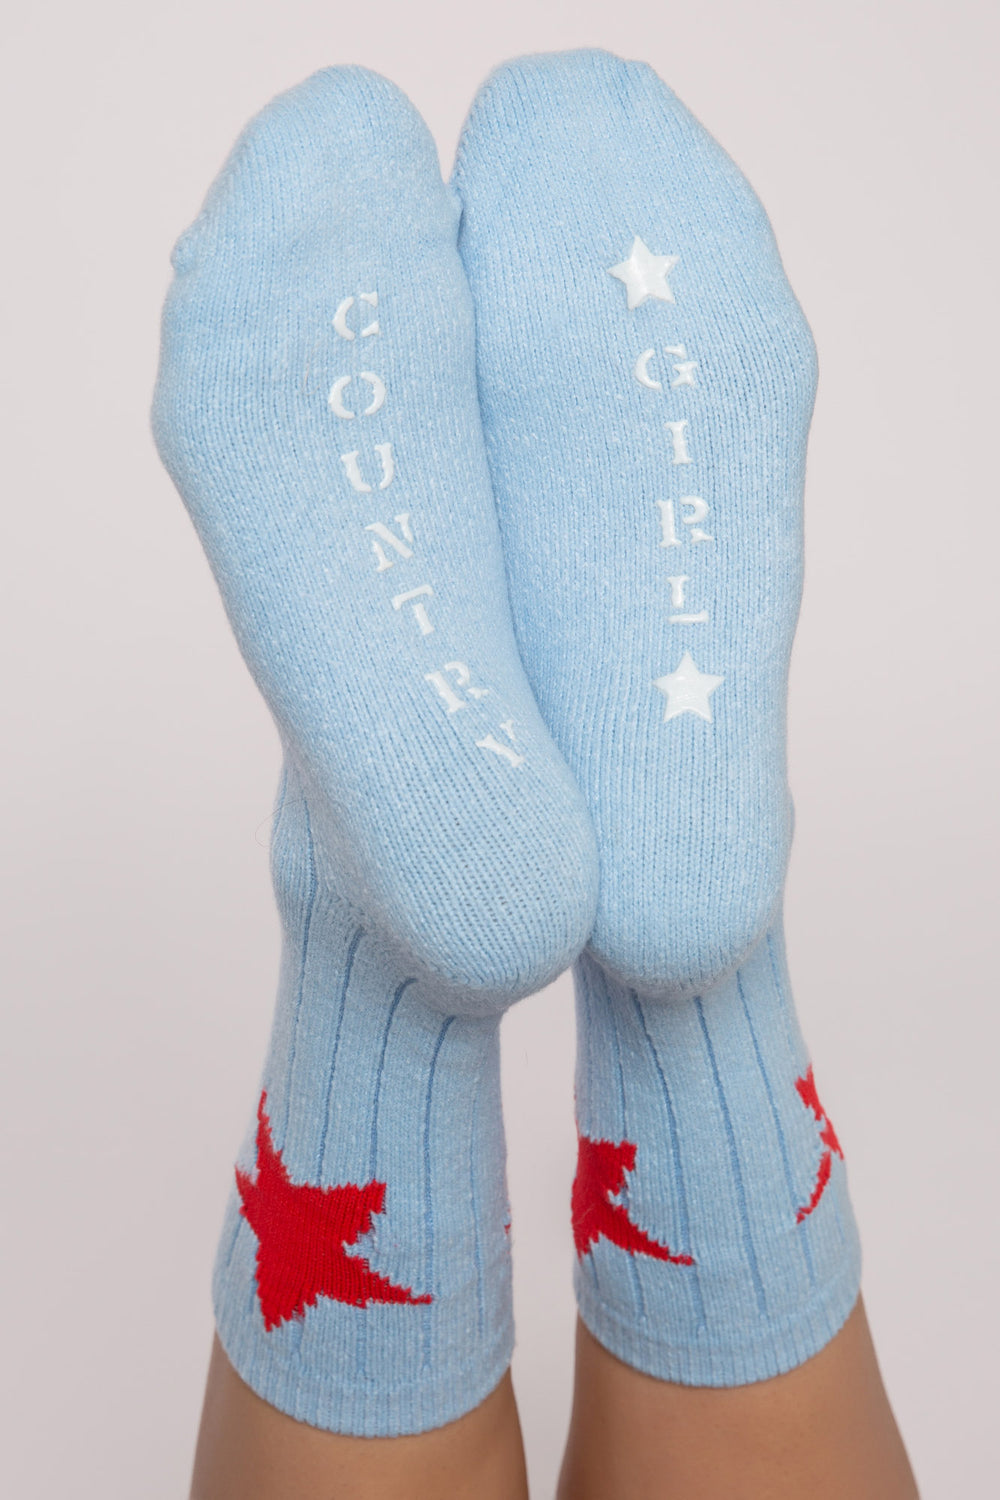 Soft blue ribbed socks with red stars on ankle & 'Country Girl' printed gripper graphic on soles. (7231871713380)